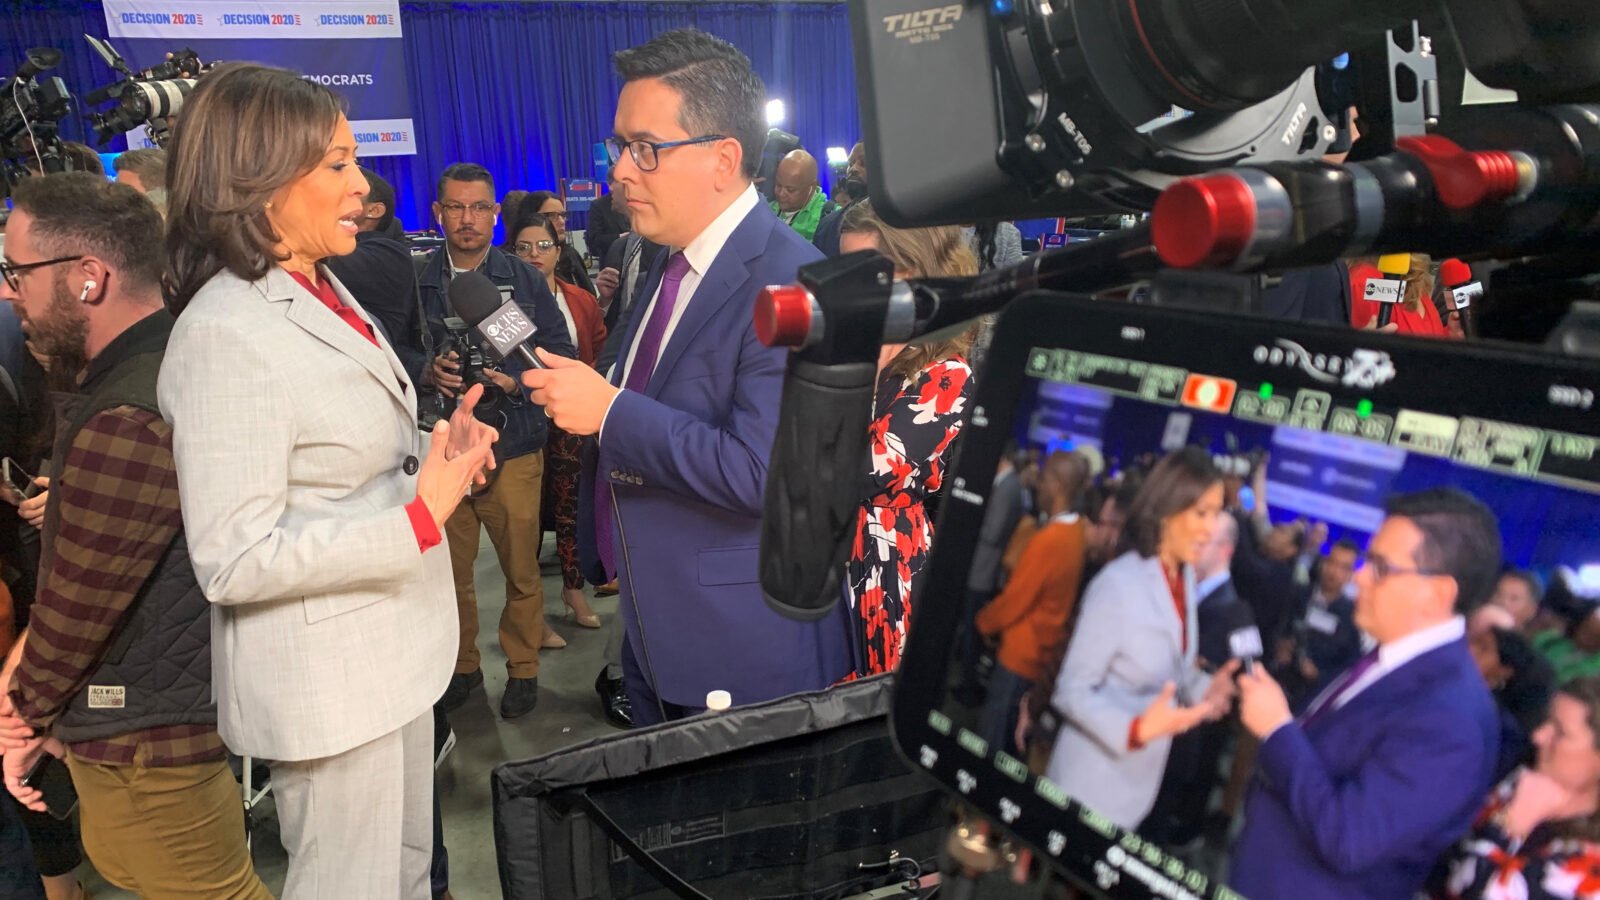 behind the scenes shot of Ed O'Keefe interviewing Vice President Kamala Harris